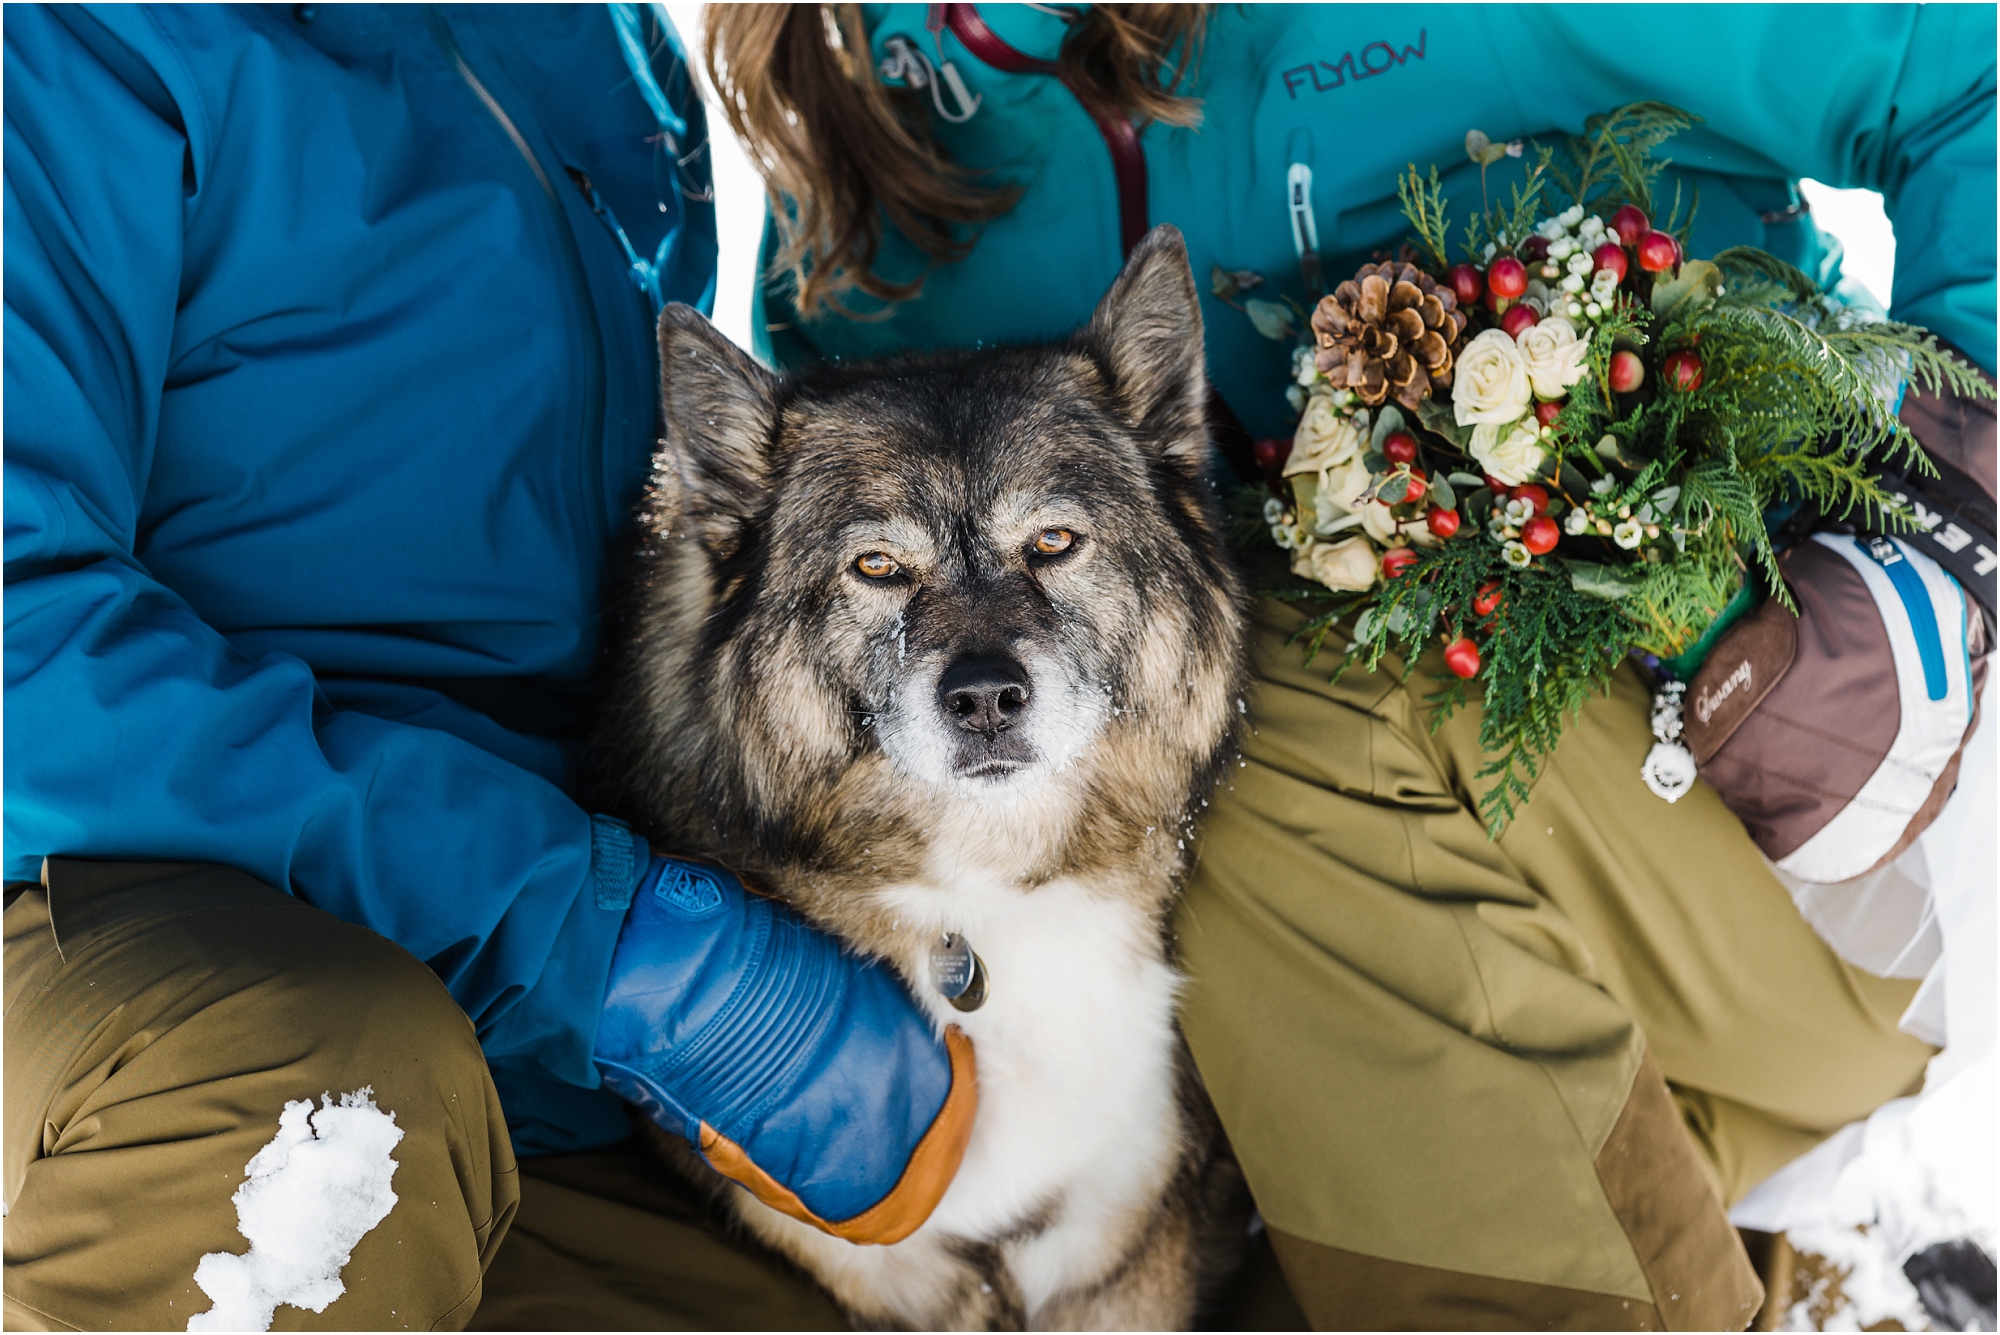 A fluffy malamute mix dog sits next to the bride's bouquet at their Mt Bachelor ski resort wedding in Bend, Oregon. | Erica Swantek Photography